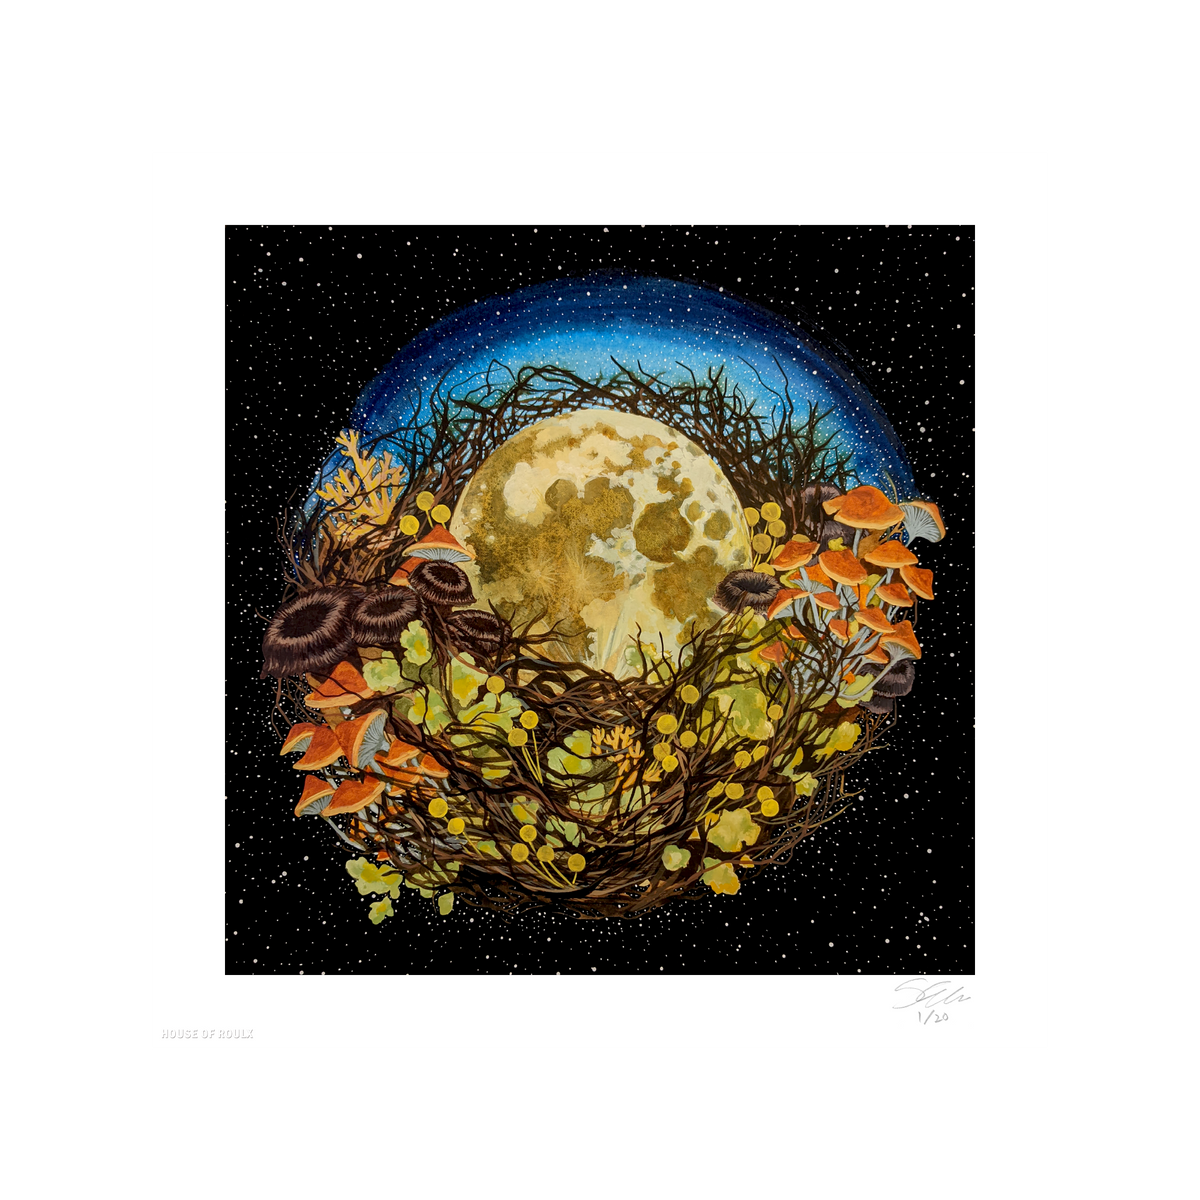 Shannon Taylor &quot;Forest Nest&quot; - Archival Print, Limited Edition of 20 - 12 x 12&quot;